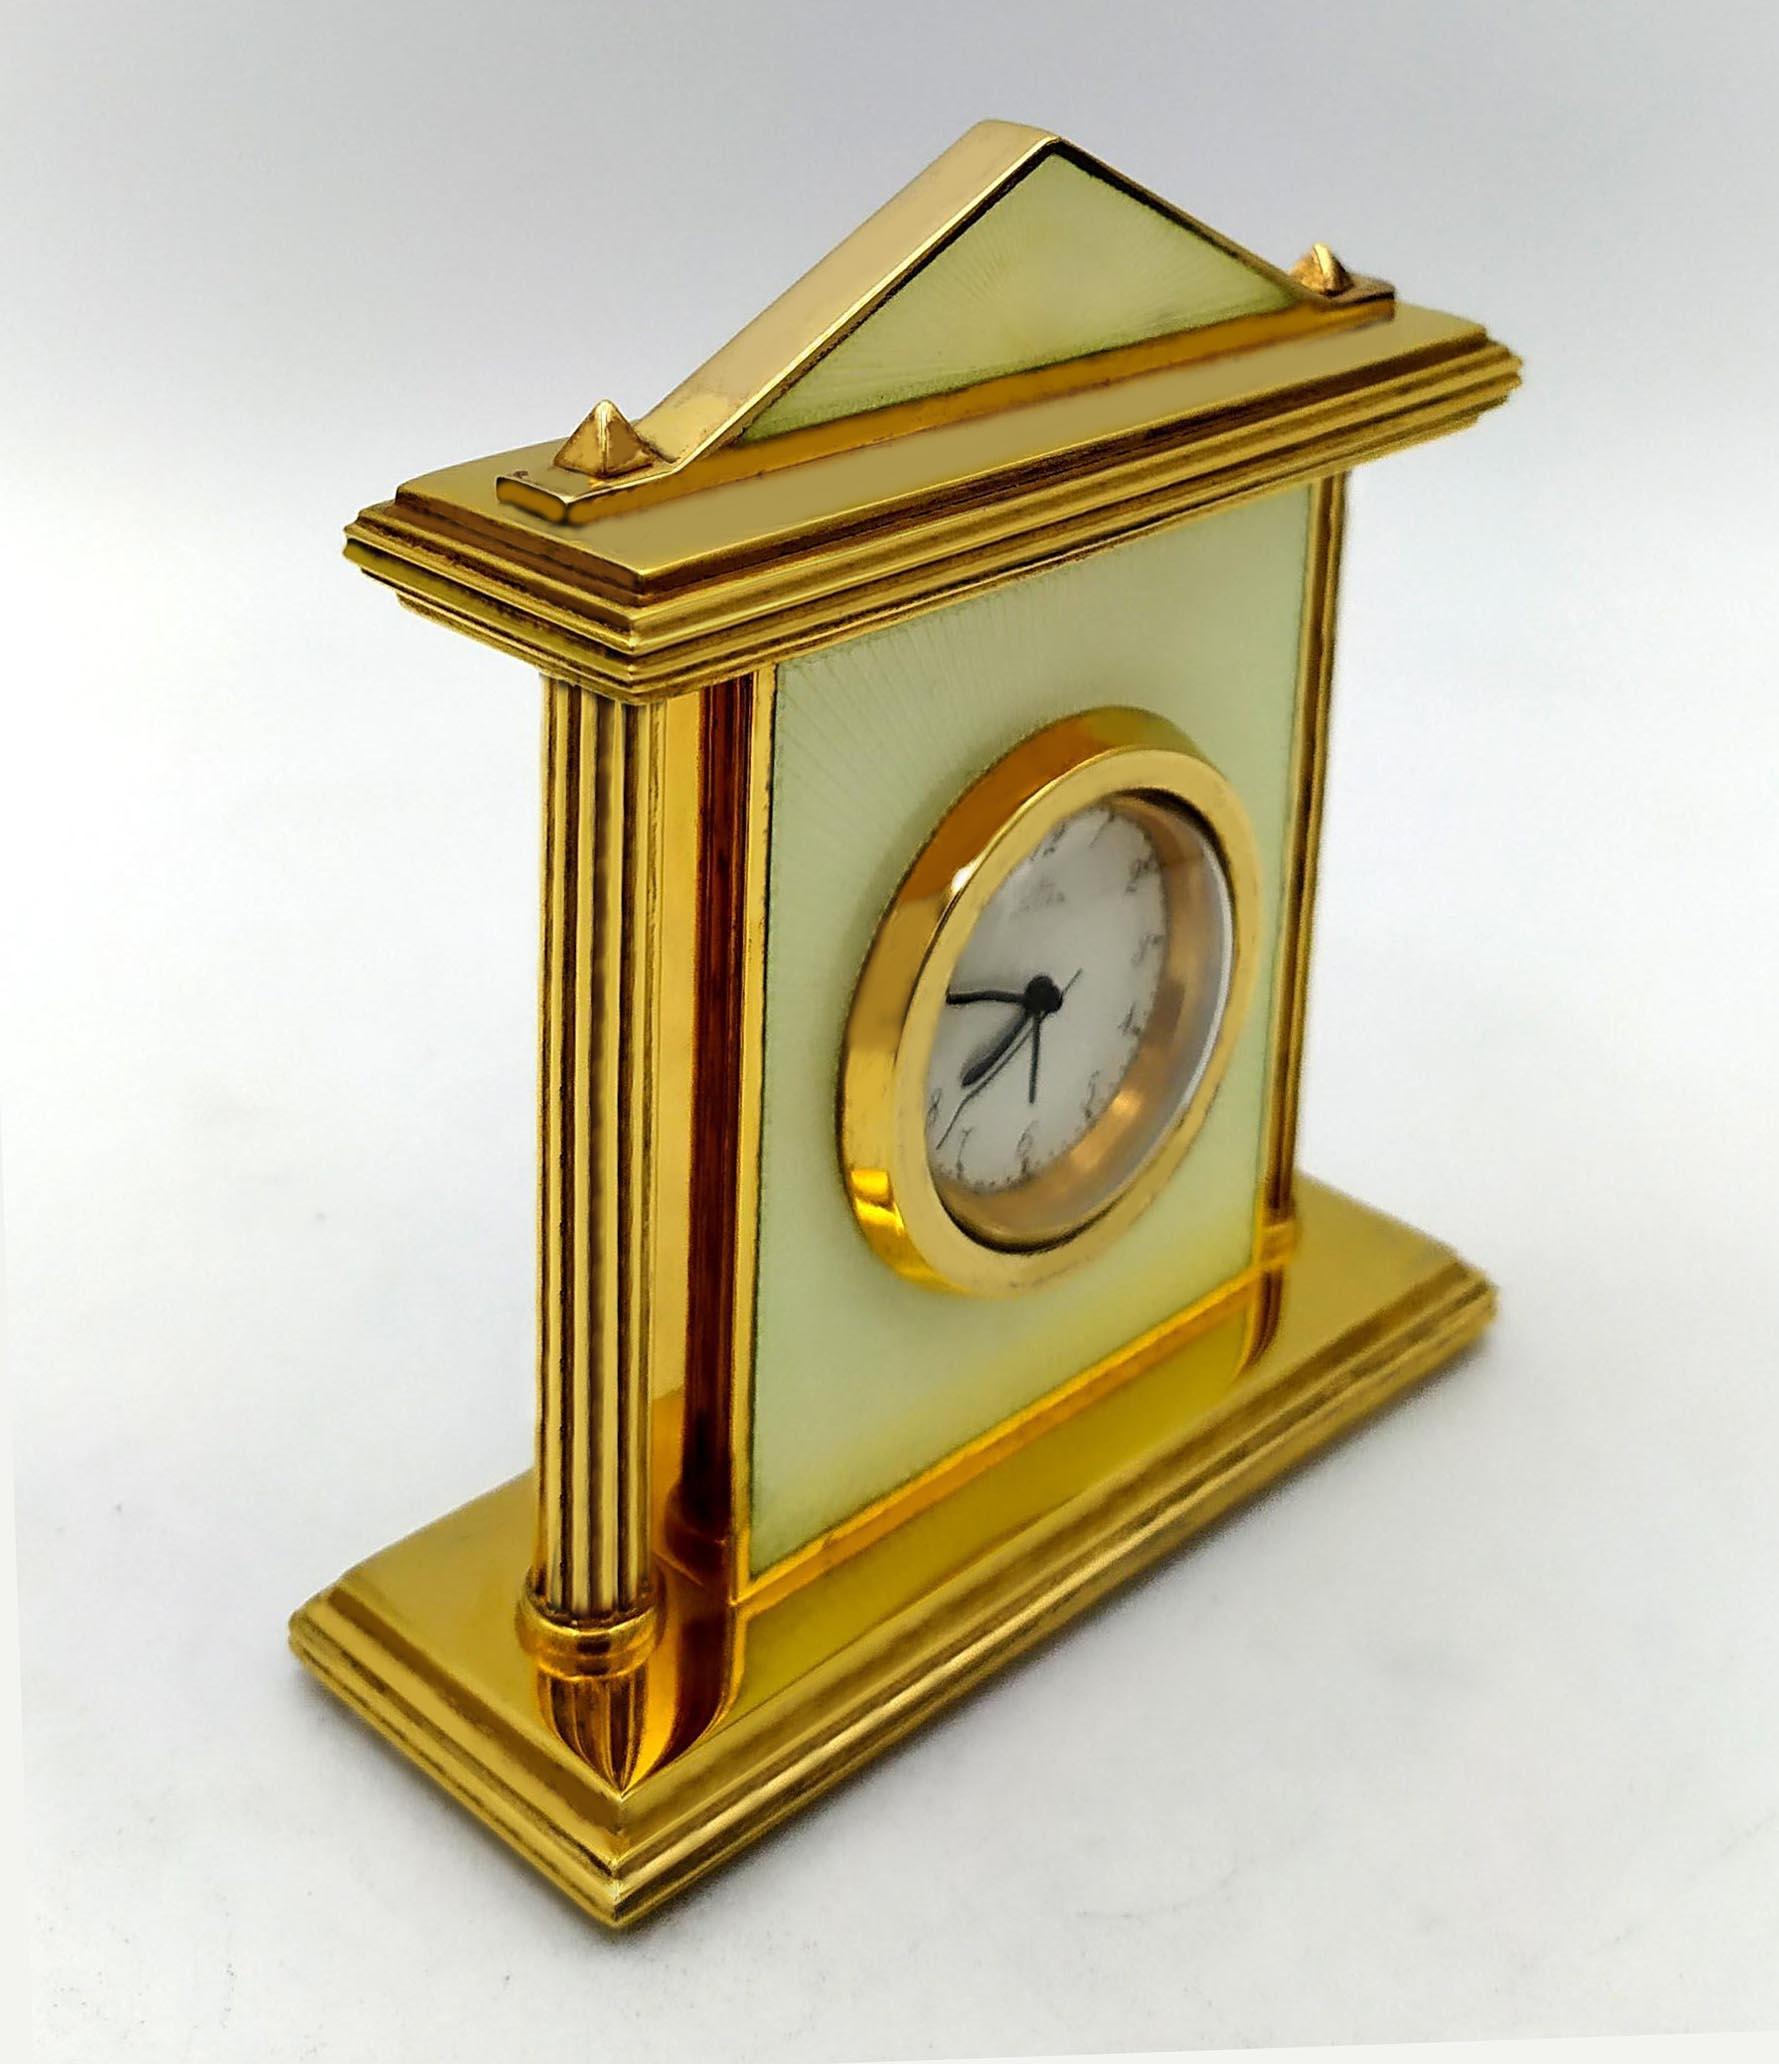 Small table clock in gold-plated 925/1000 sterling silver with translucent enamel fired on guilloche, with columns in neo-classical Hellenic style. Swiss mechanical movement from Maison Pontifa (Neuchatel) with 8-day movement and alarm. Base